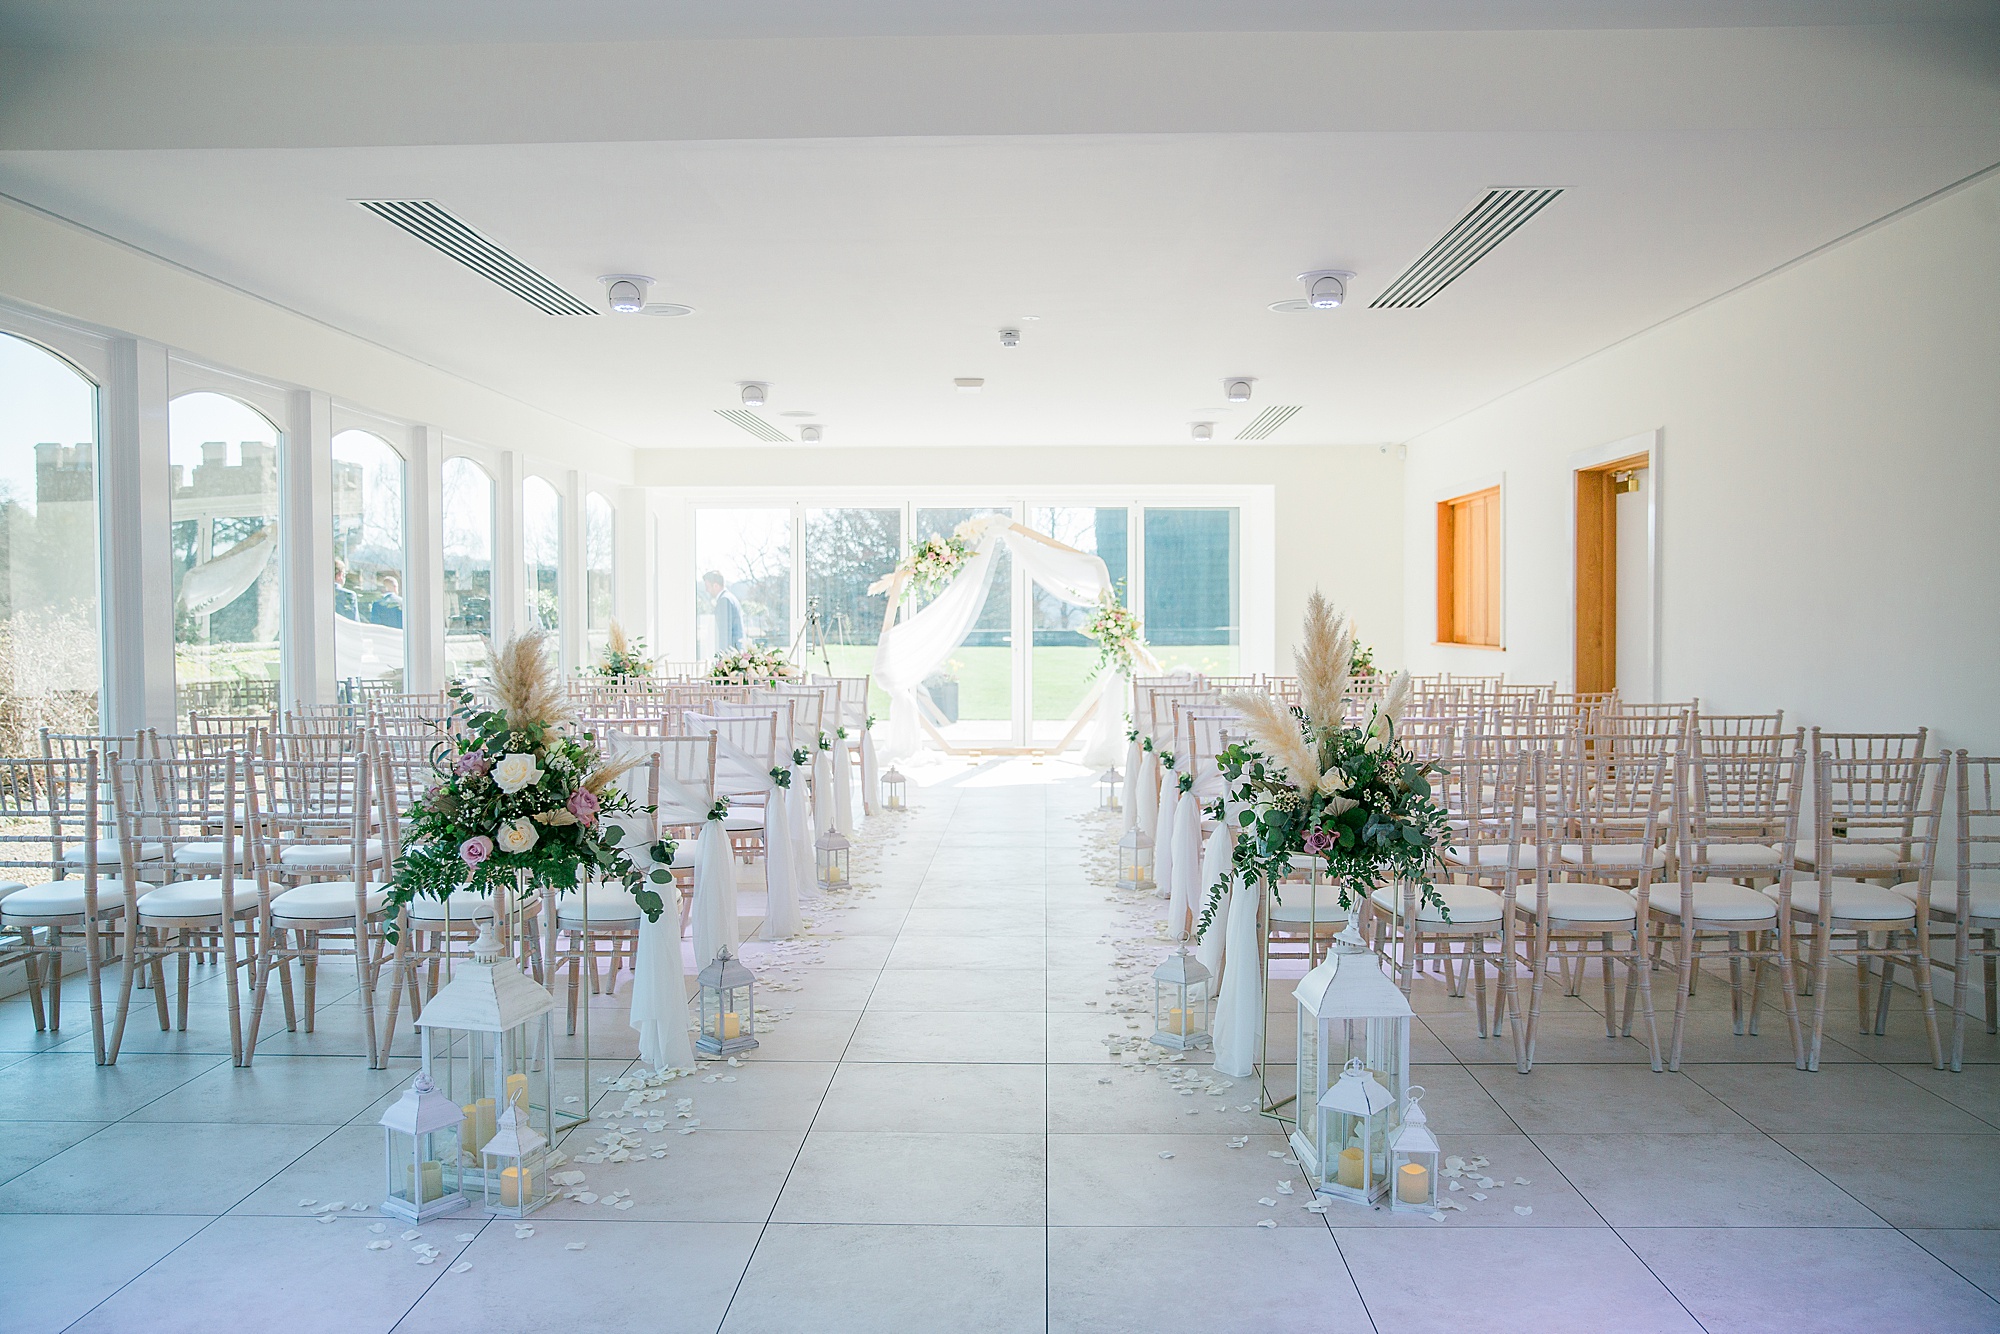 View of the orangery ready for a wedding ceremony at arley house